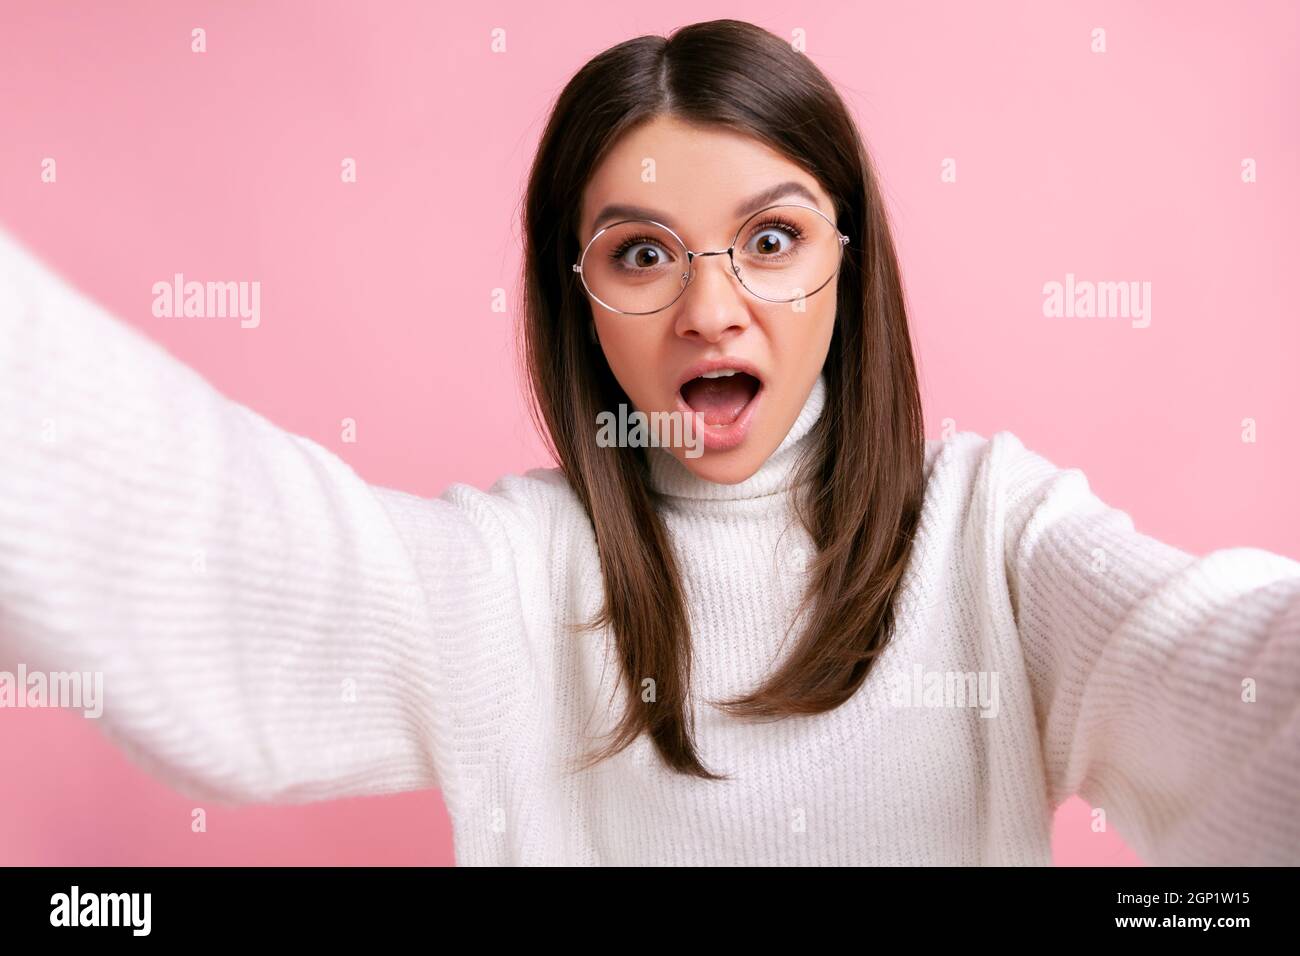 Shocked young adult female taking selfie, having astonished and scared look, point of view photo, wearing white casual style sweater. Indoor studio shot isolated on pink background. Stock Photo